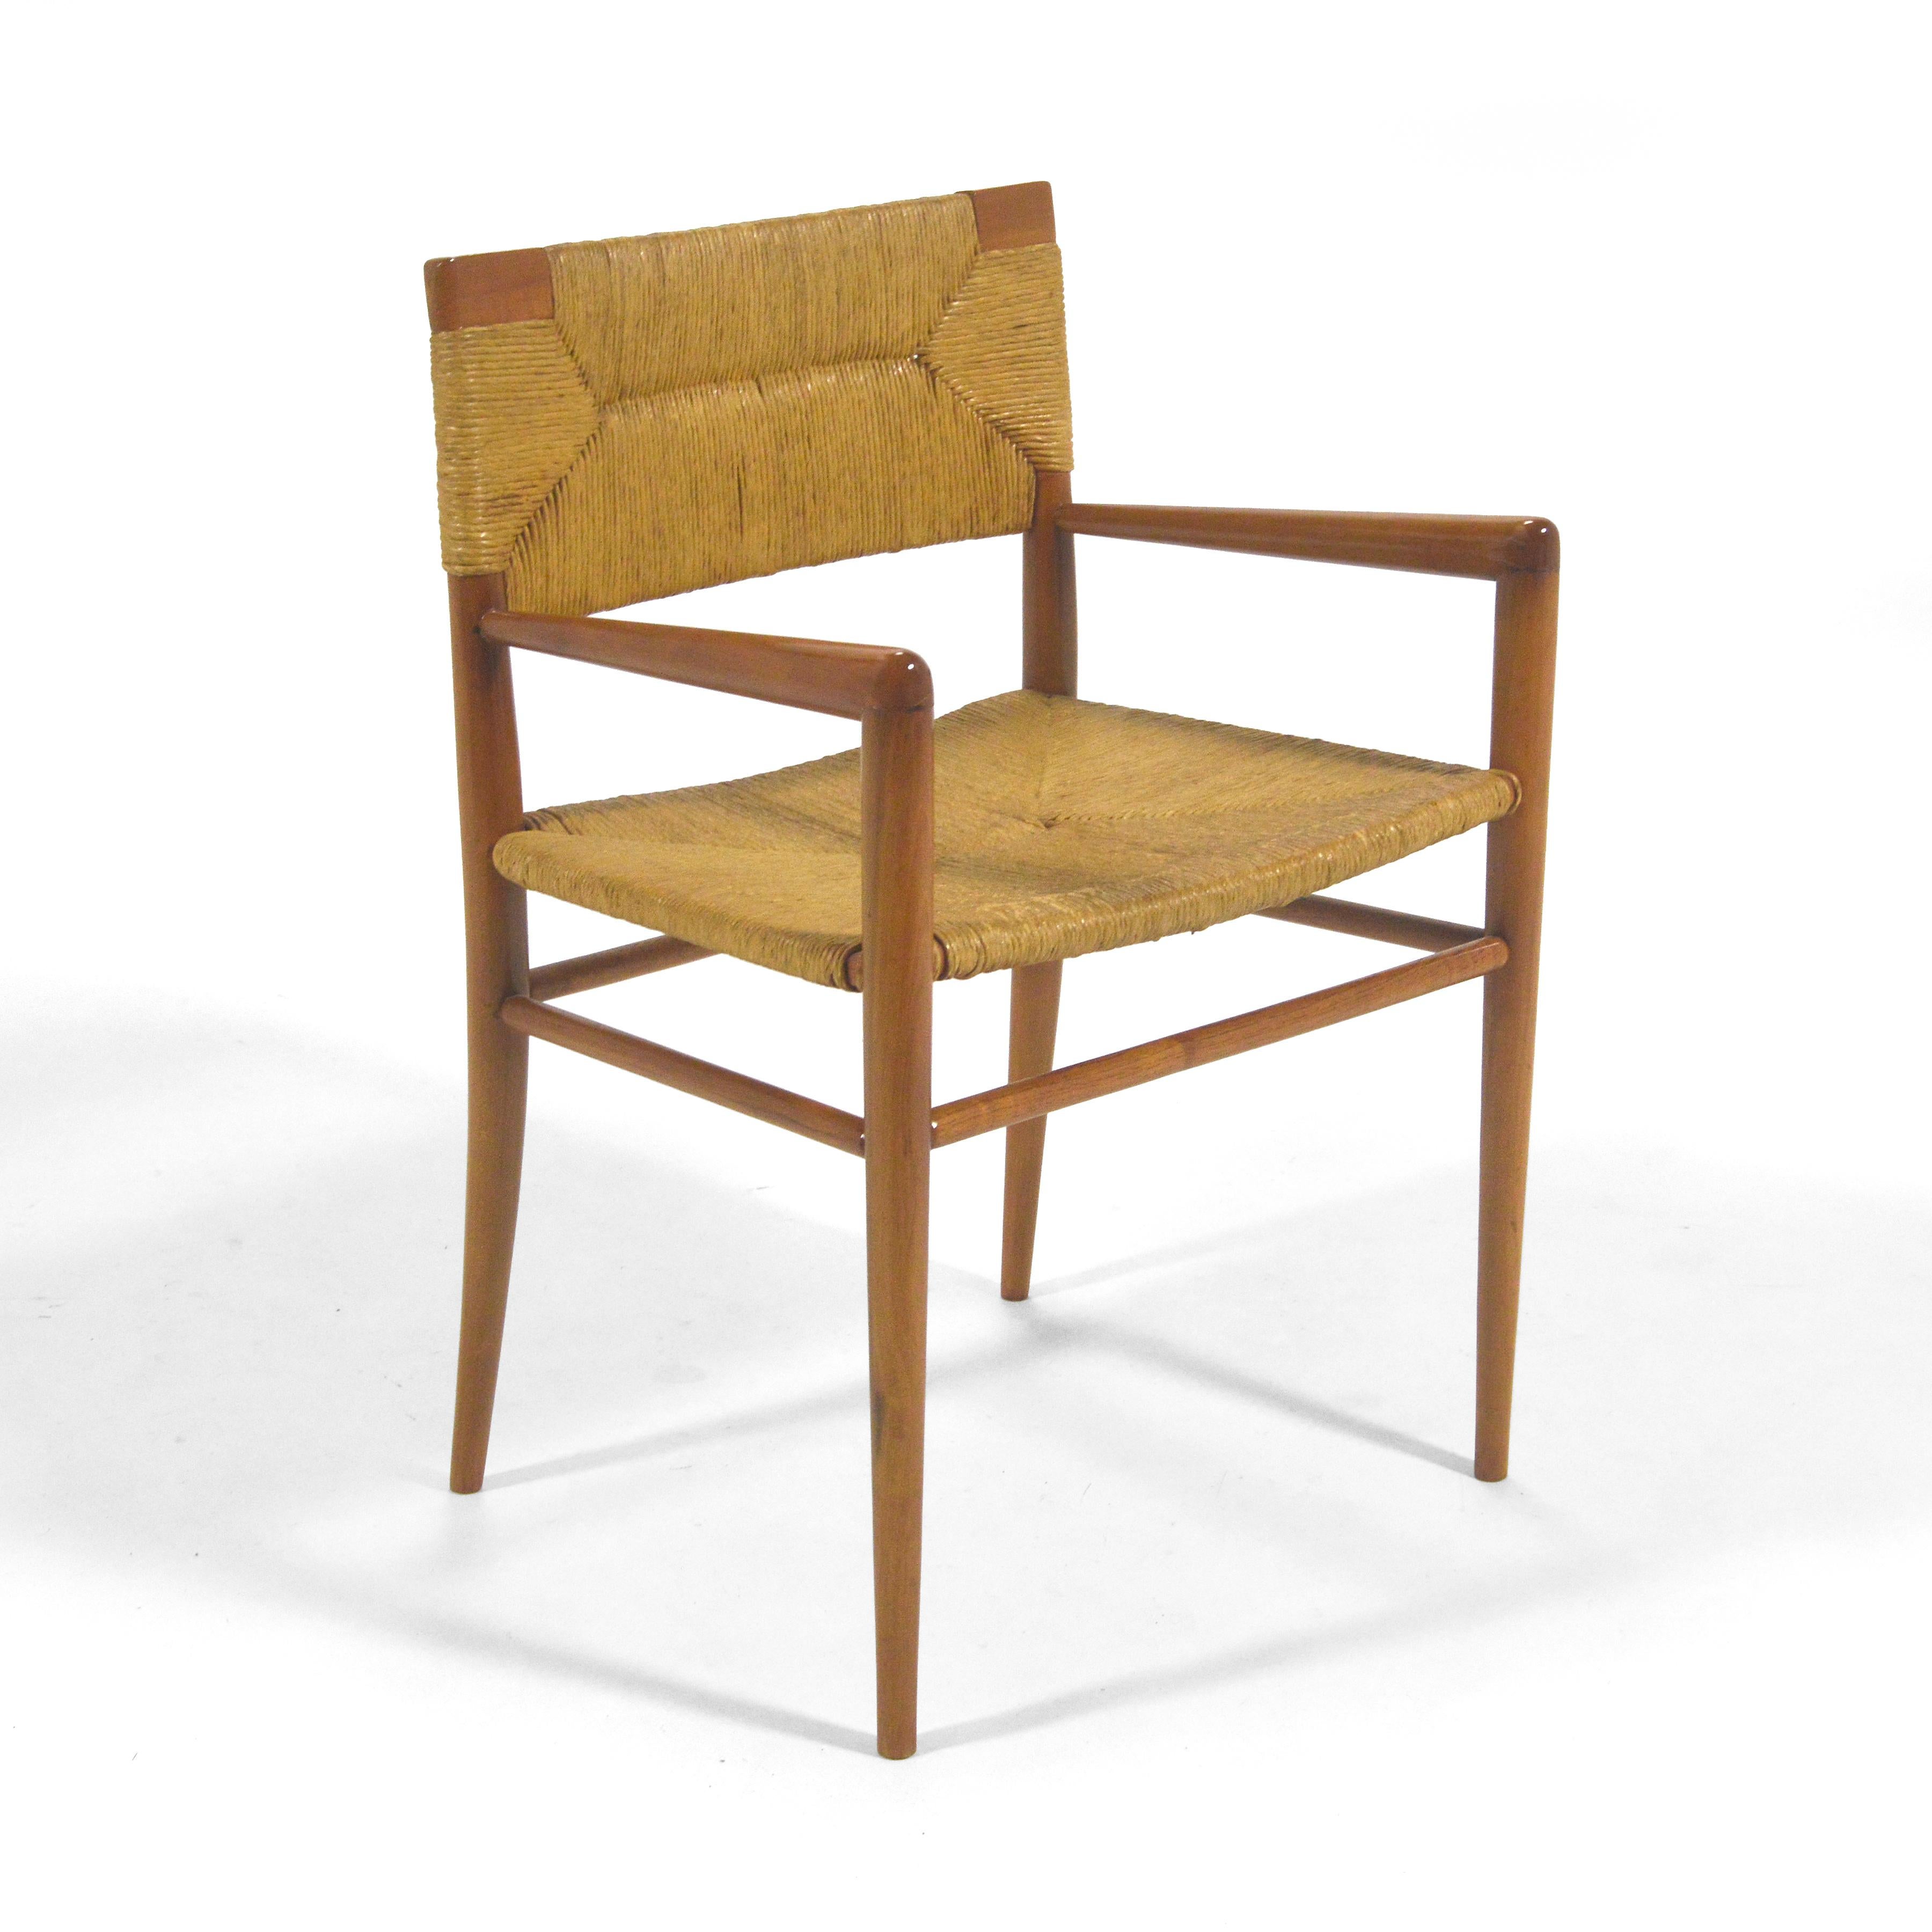 The subtle, almost austere design of Mel Smilow's lounge chair positions it somewhere between a Scandinavian and French aesthetic. The walnut frame supports a seat and back of woven rush. The rakish, angular design points to its midcentury pedigree.